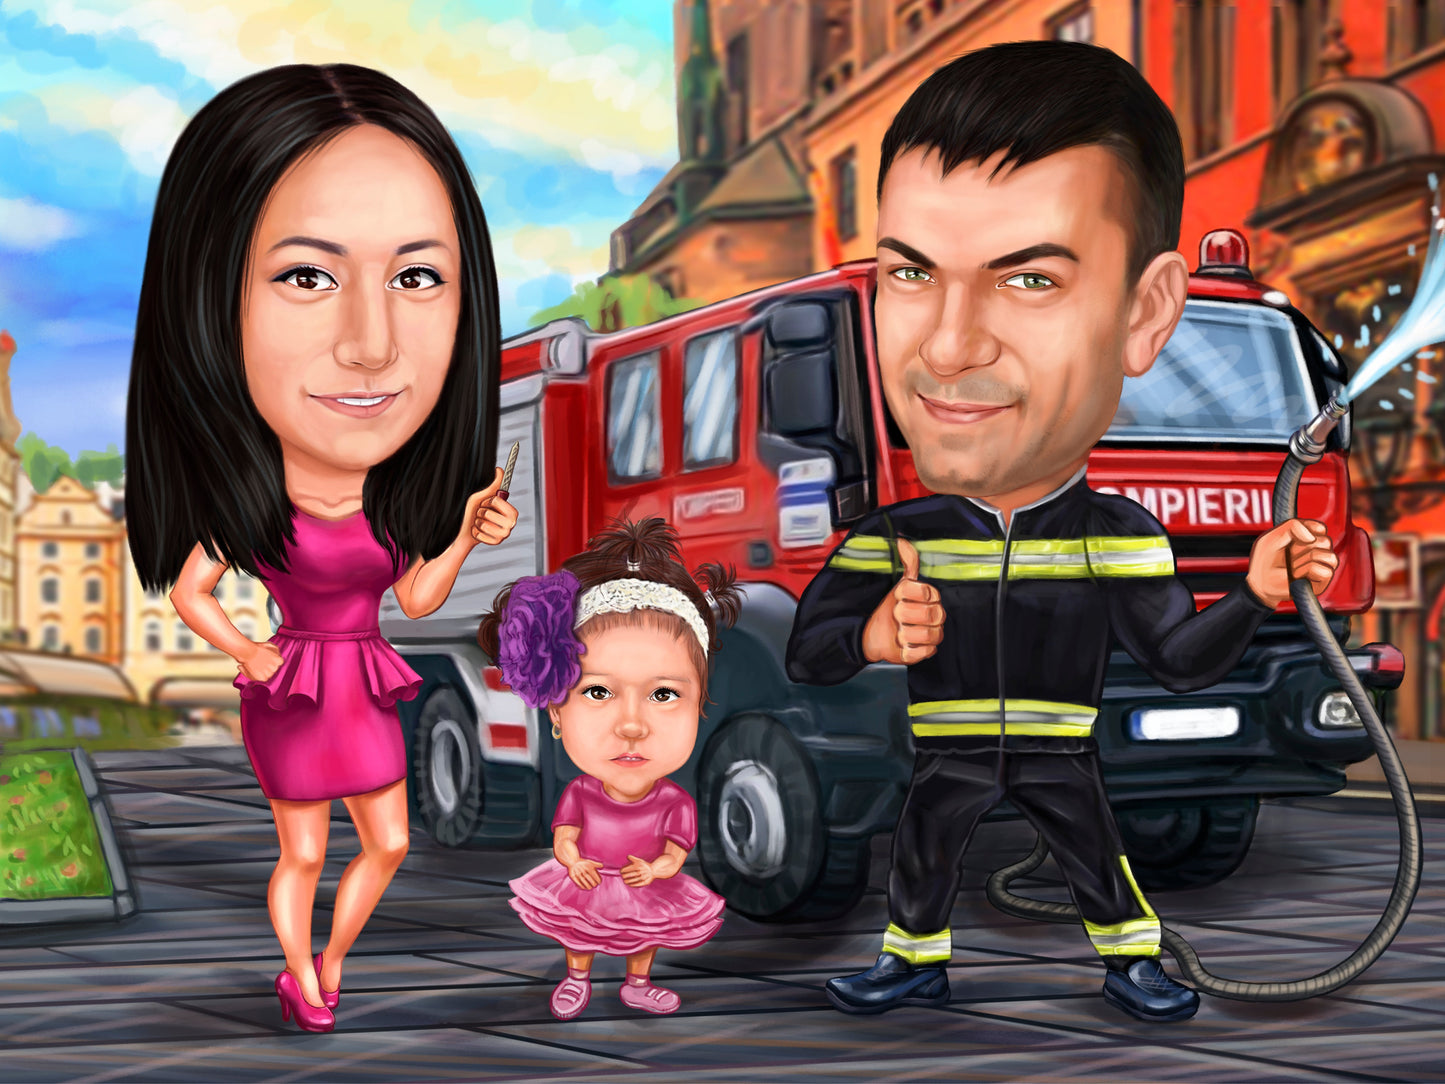 Firefighter's help family caricature